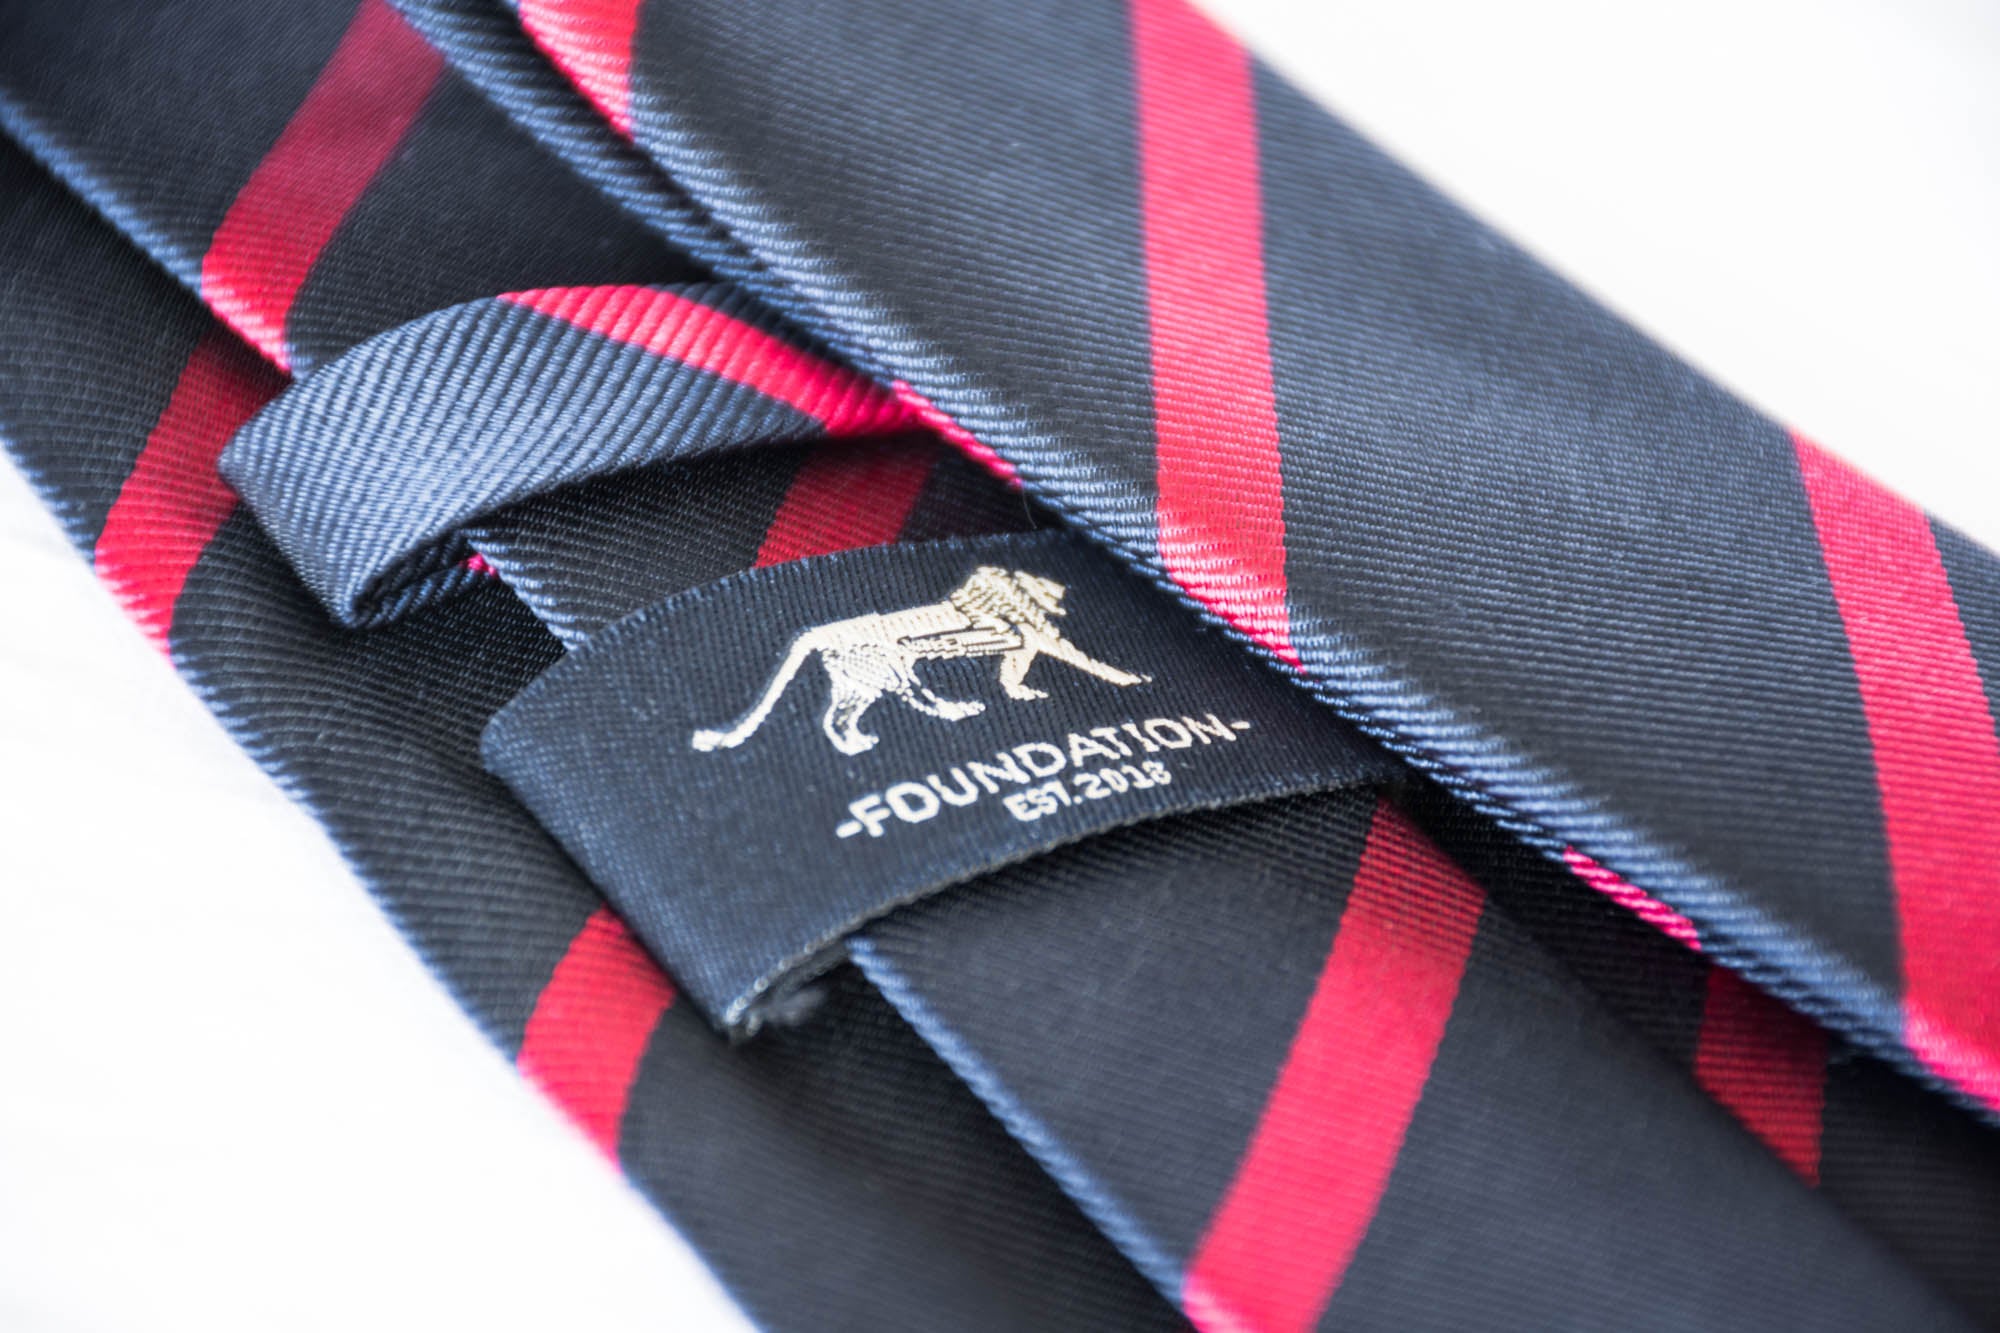 Classic Navy Blue Lined Polyester Tie